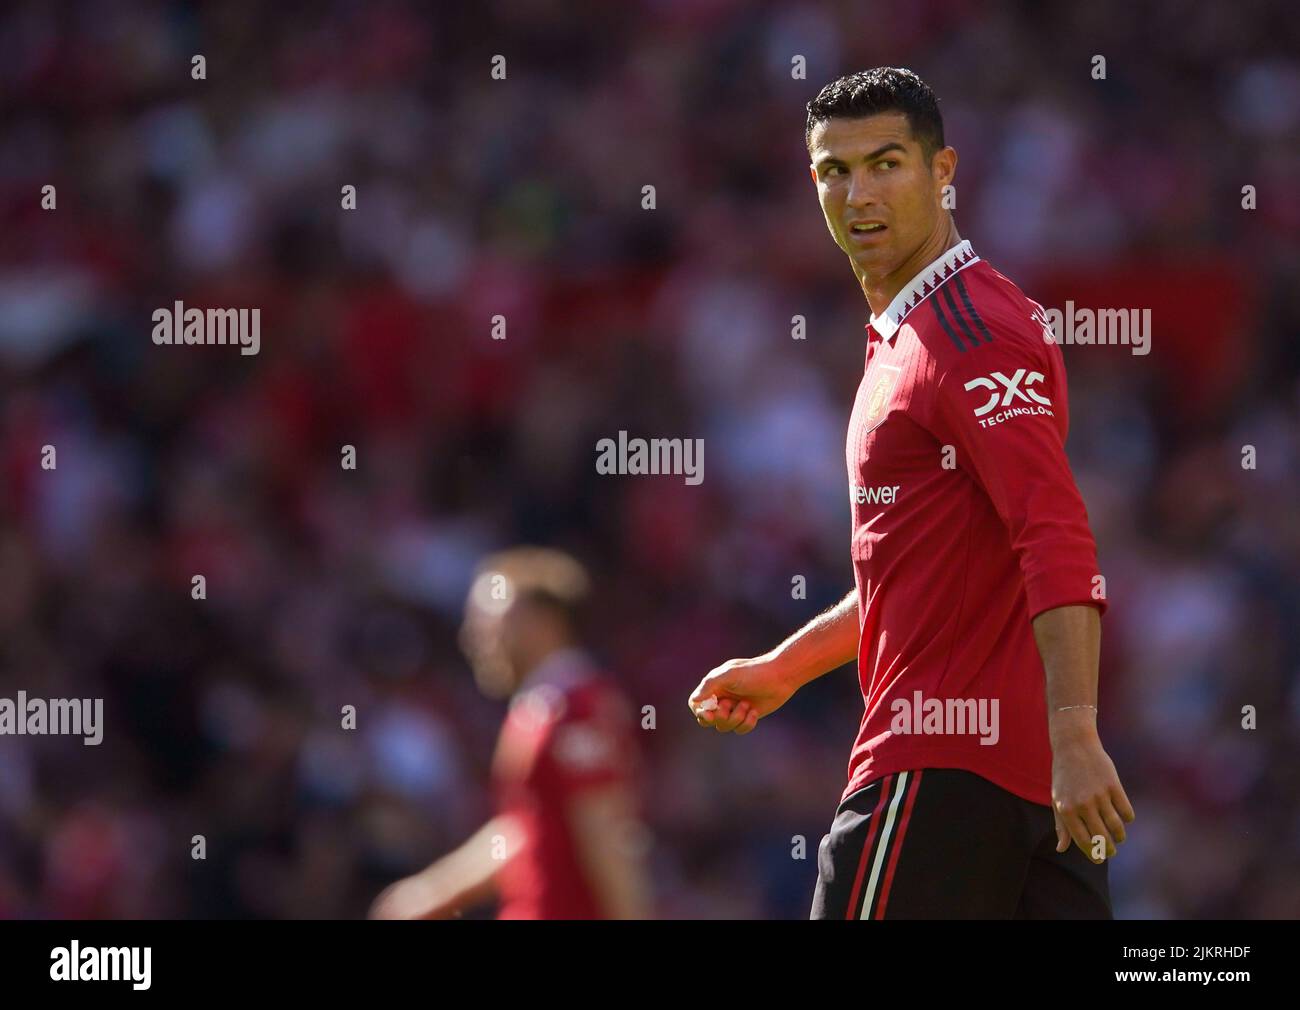 File photo dated 31-07-2022 of Manchester United's Cristiano Ronaldo. Erik ten Hag says it was 'unacceptable' for Cristiano Ronaldo and other Manchester United players to leave Old Trafford before the end of Sunday's friendly against Rayo Vallecano. Issue date: Wednesday August 3, 2022. Stock Photo